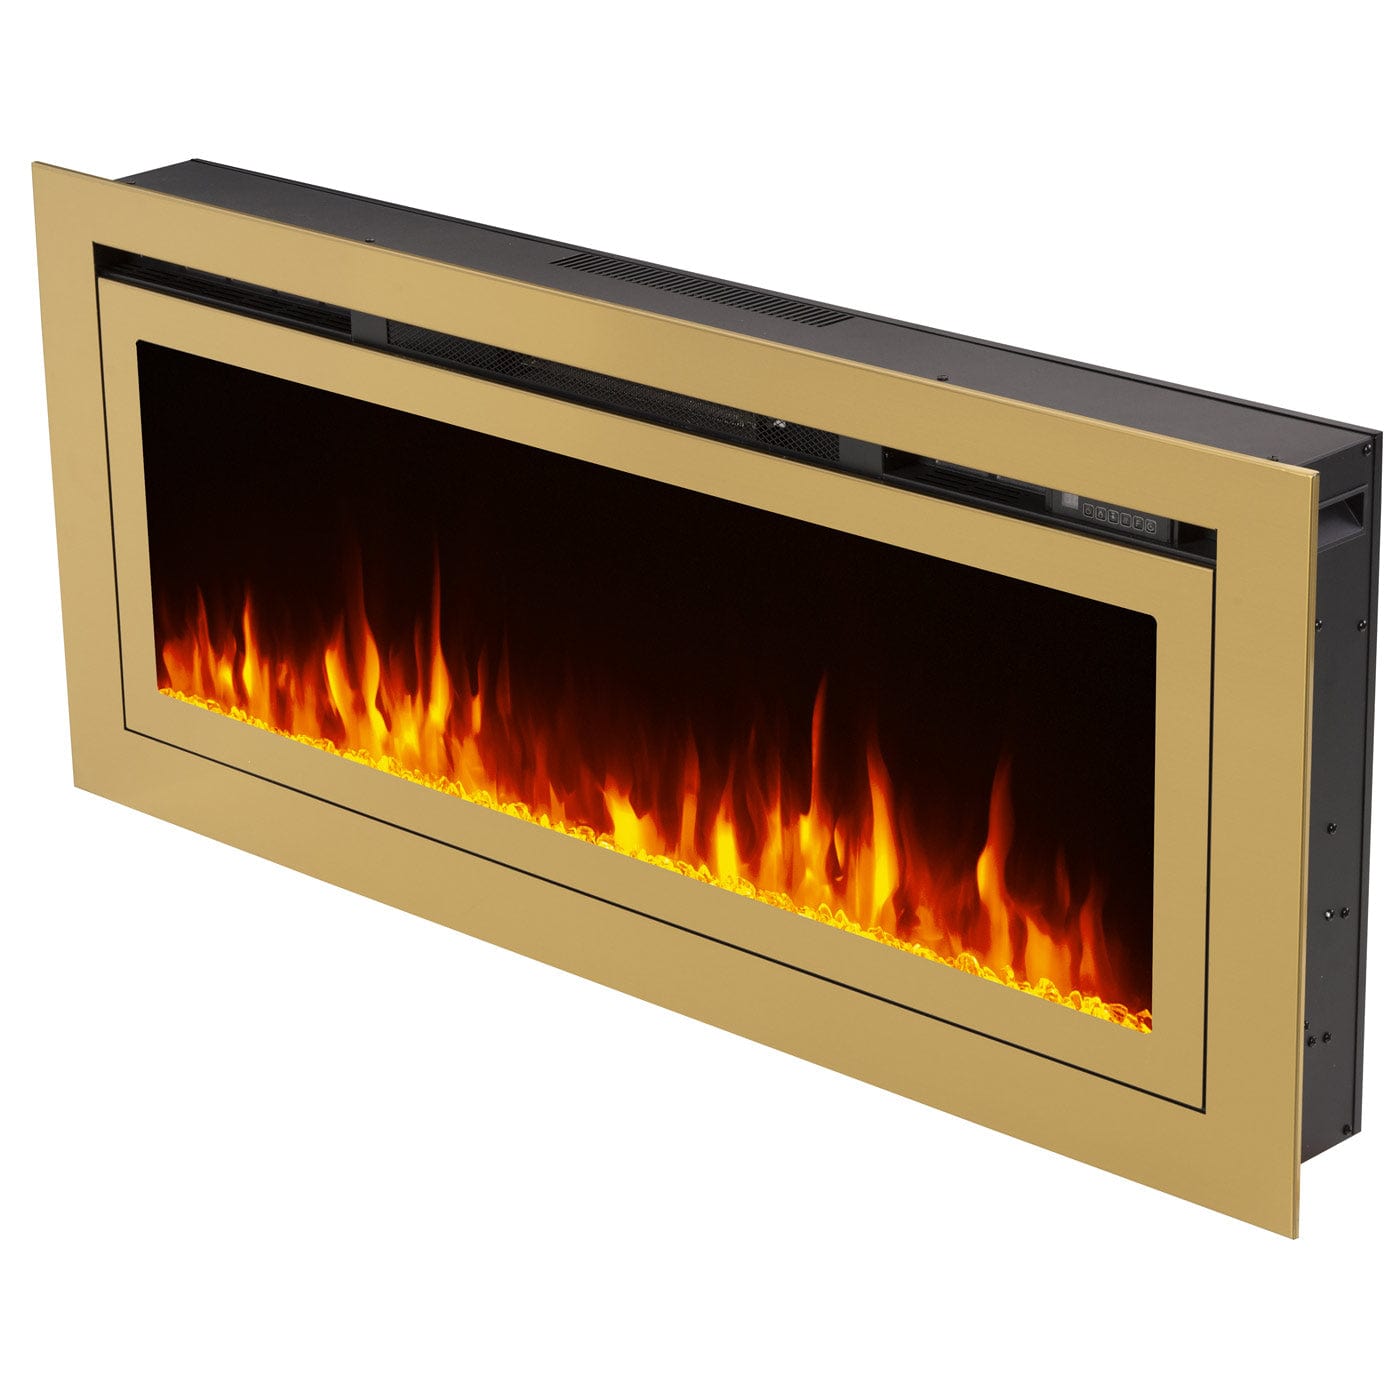 Touchstone 86275 Sideline 50 Gold Frame Recessed Electric Fireplace 50  Inches Wide, 1500W Heat, Stainless Steel – Touchstone Home Products, Inc.